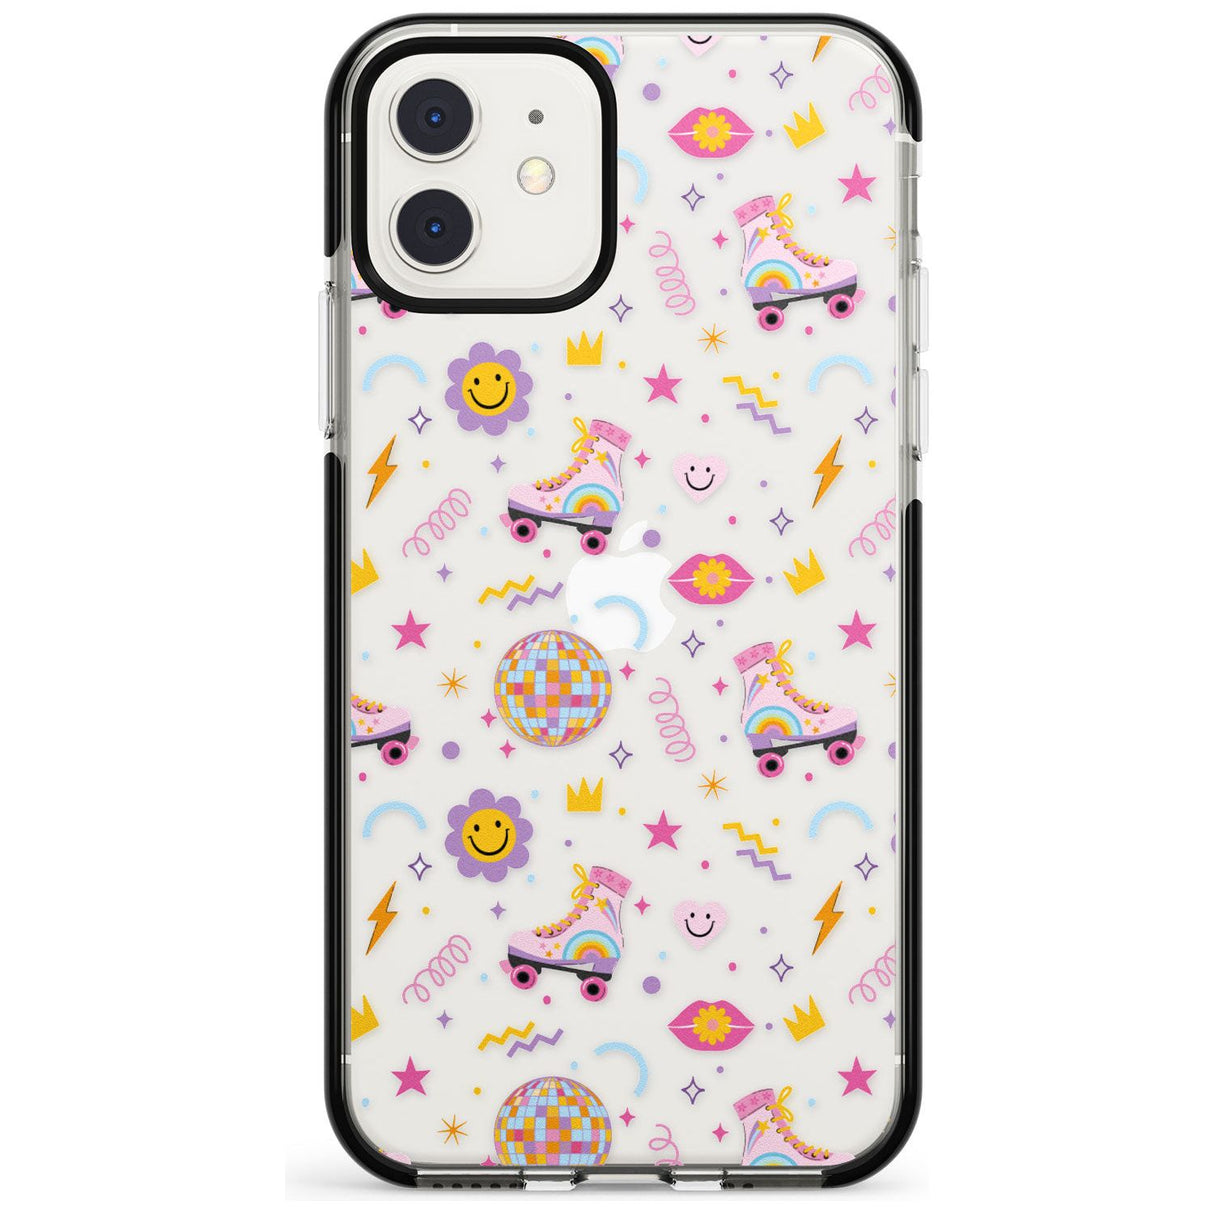 Roller Disco Pattern Black Impact Phone Case for iPhone 11 Pro Max